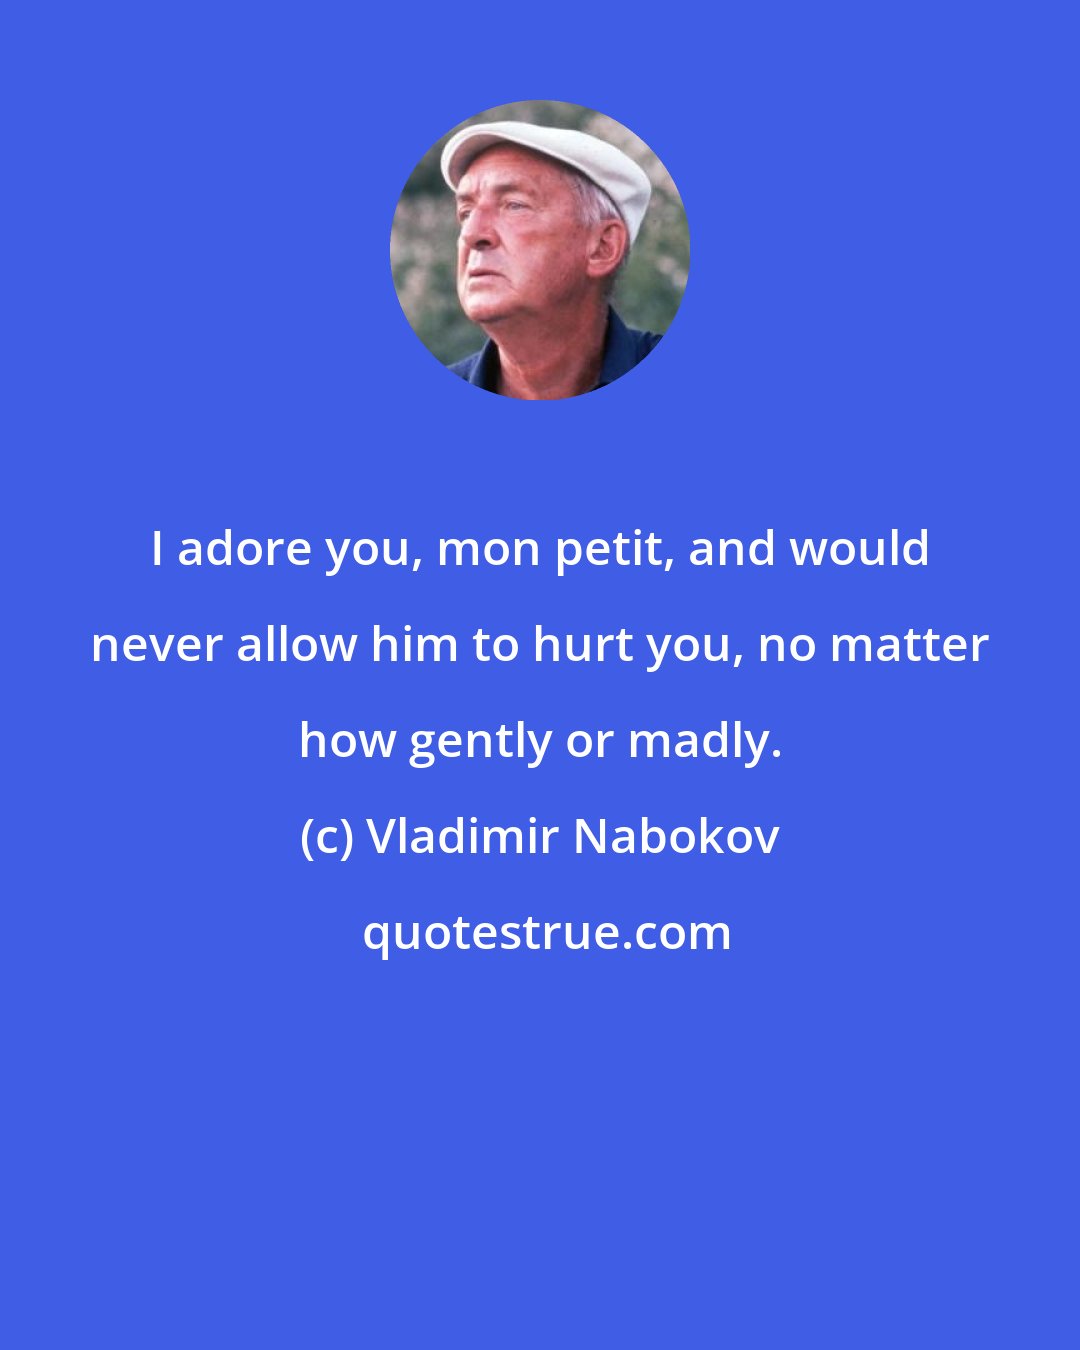 Vladimir Nabokov: I adore you, mon petit, and would never allow him to hurt you, no matter how gently or madly.